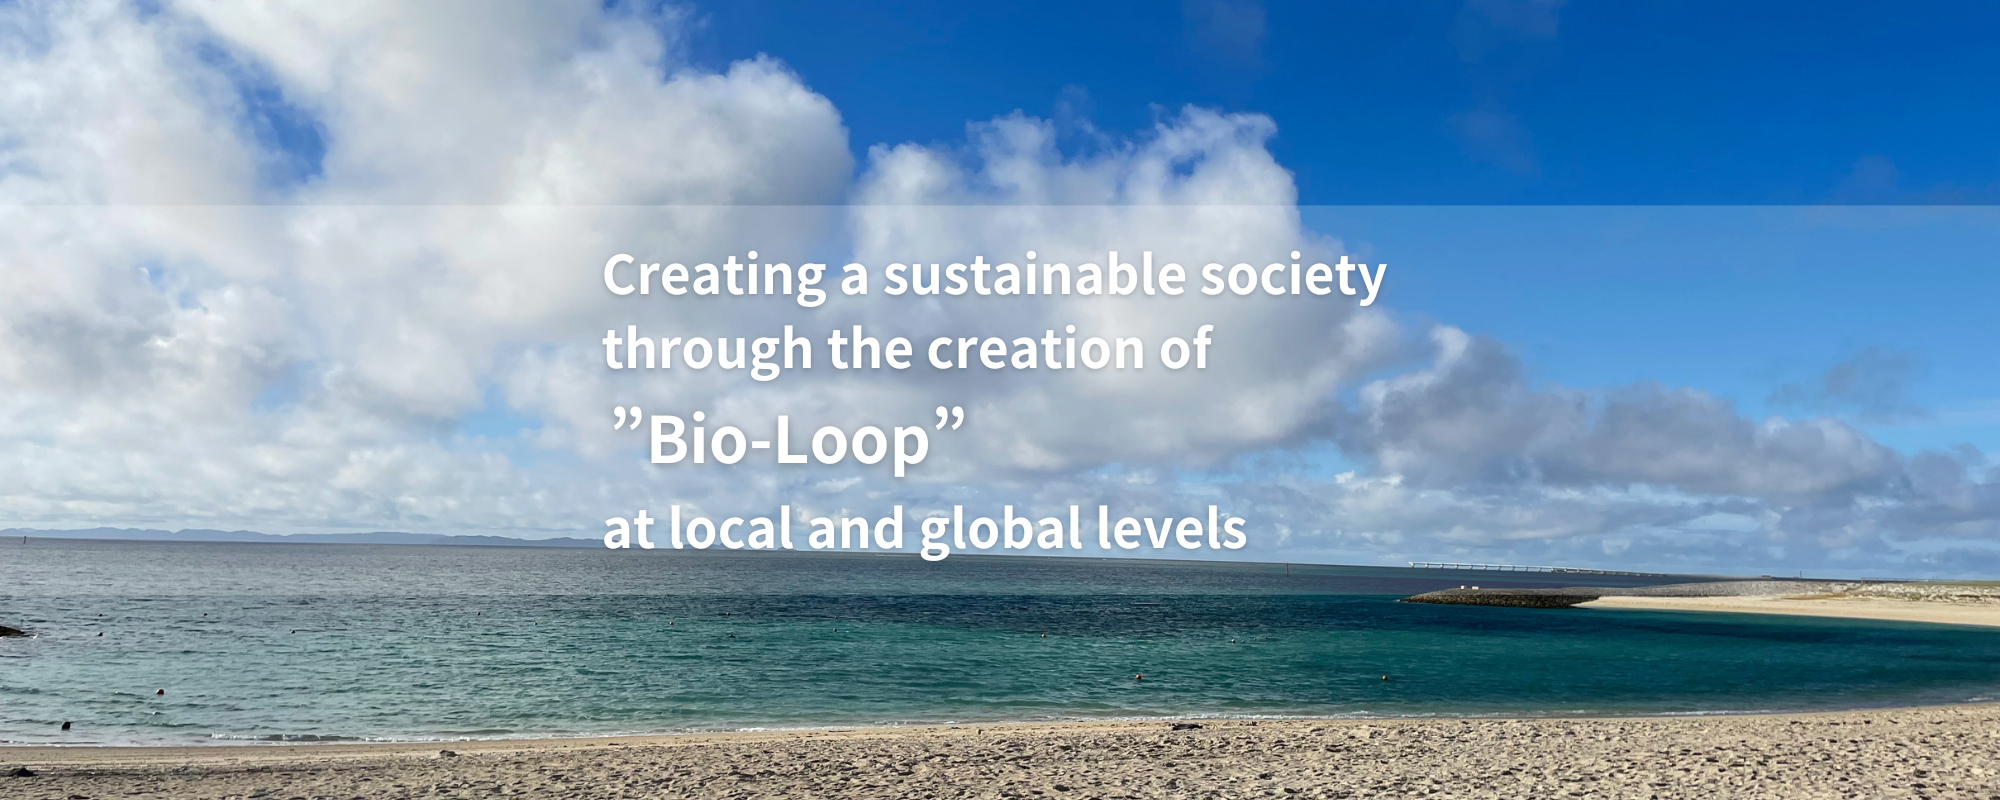 Creating a sustainable society through the creation of ”Bio-Loop” at local and global levels